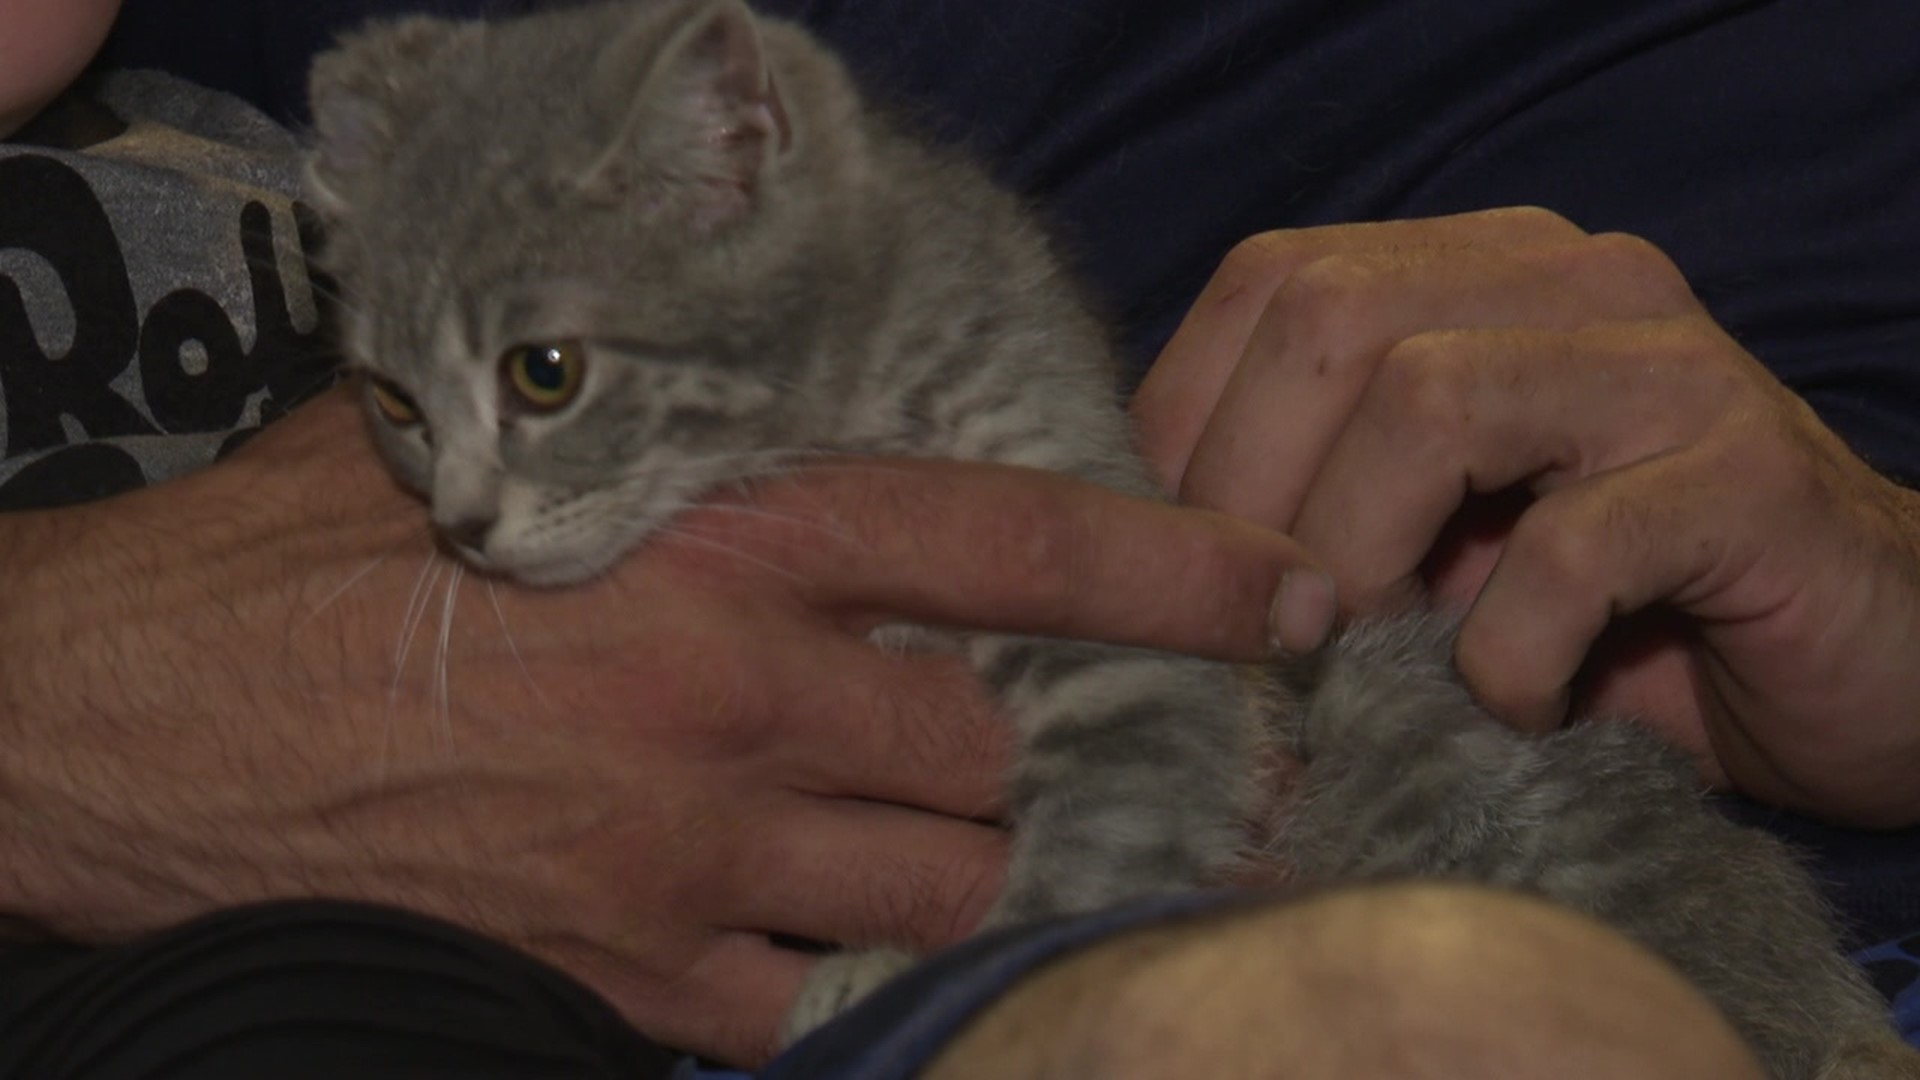 They say it takes a village to raise a child but what about a kitten? A Monroe County man says that was the question when he rescued a kitten after a hit and run.